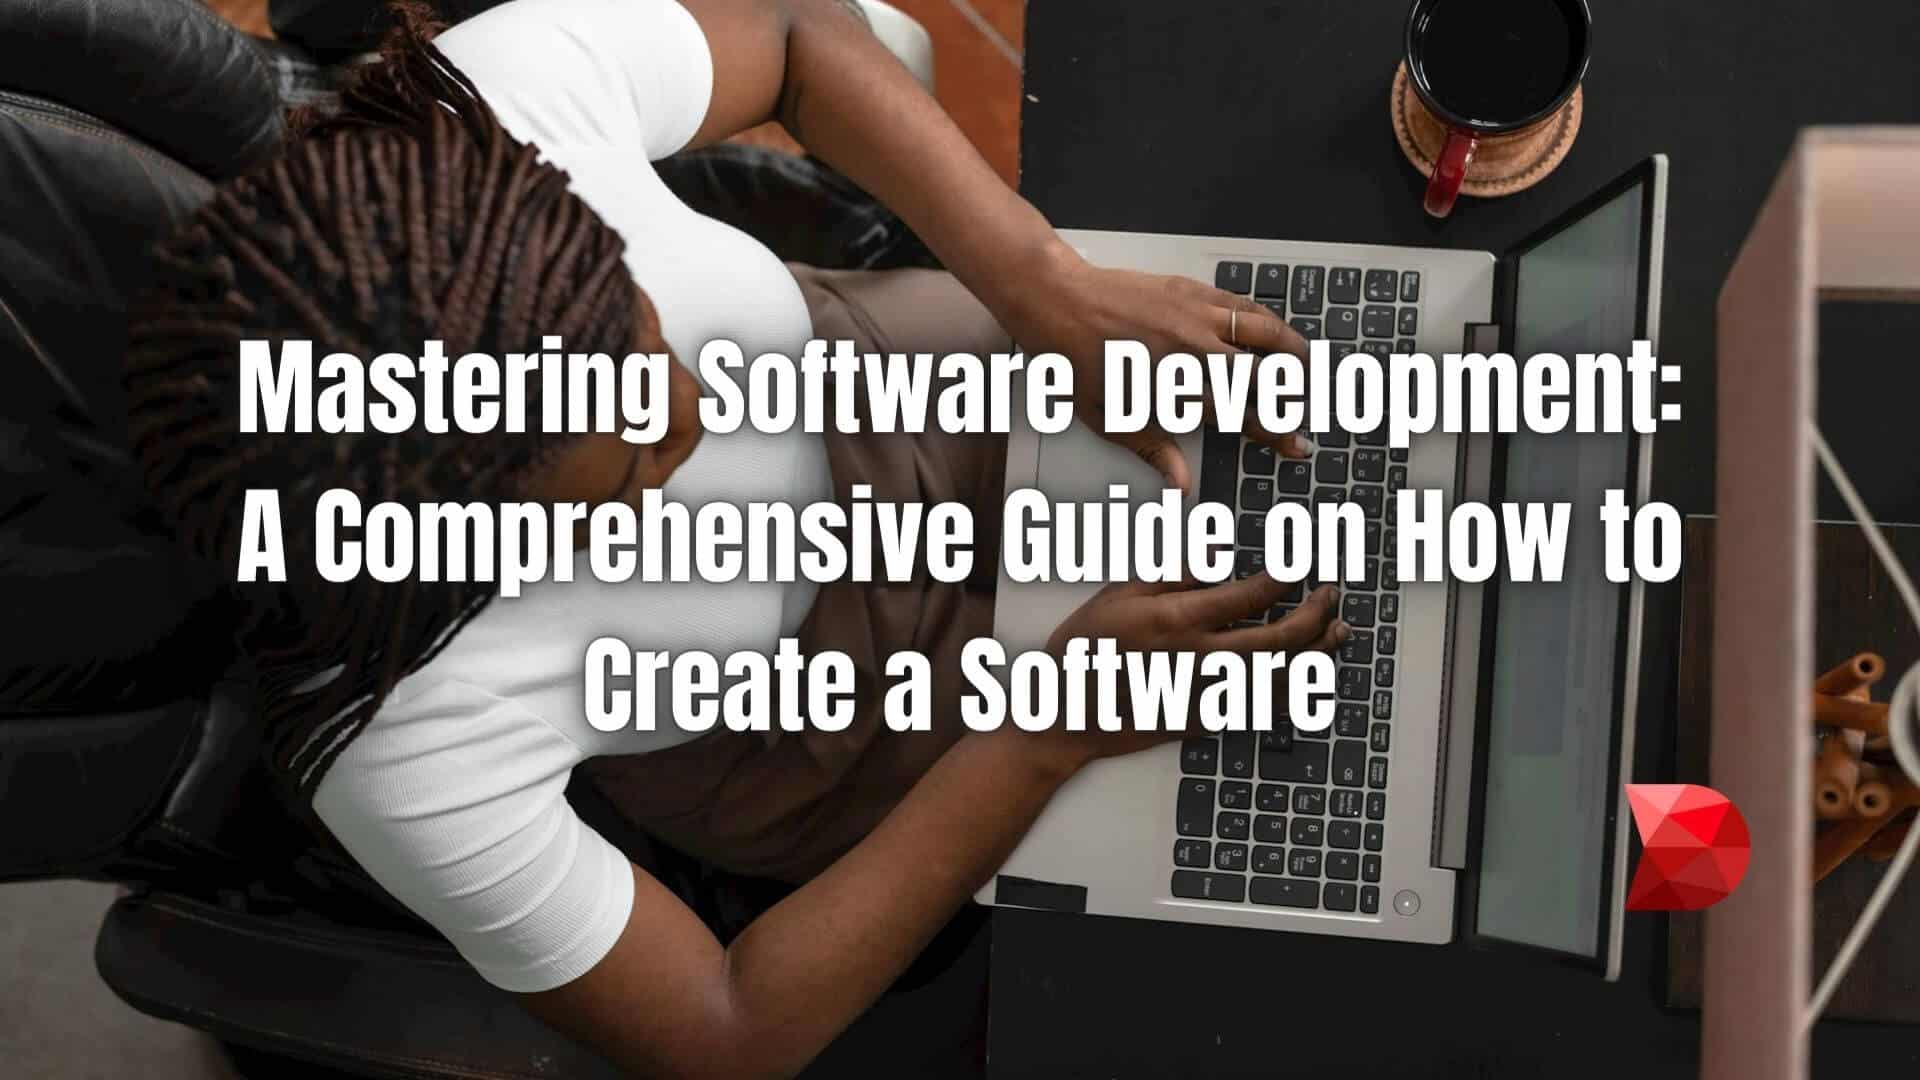 We will discuss the steps on how to create software and help you transition from novice to absolute software development pro. Read more here!